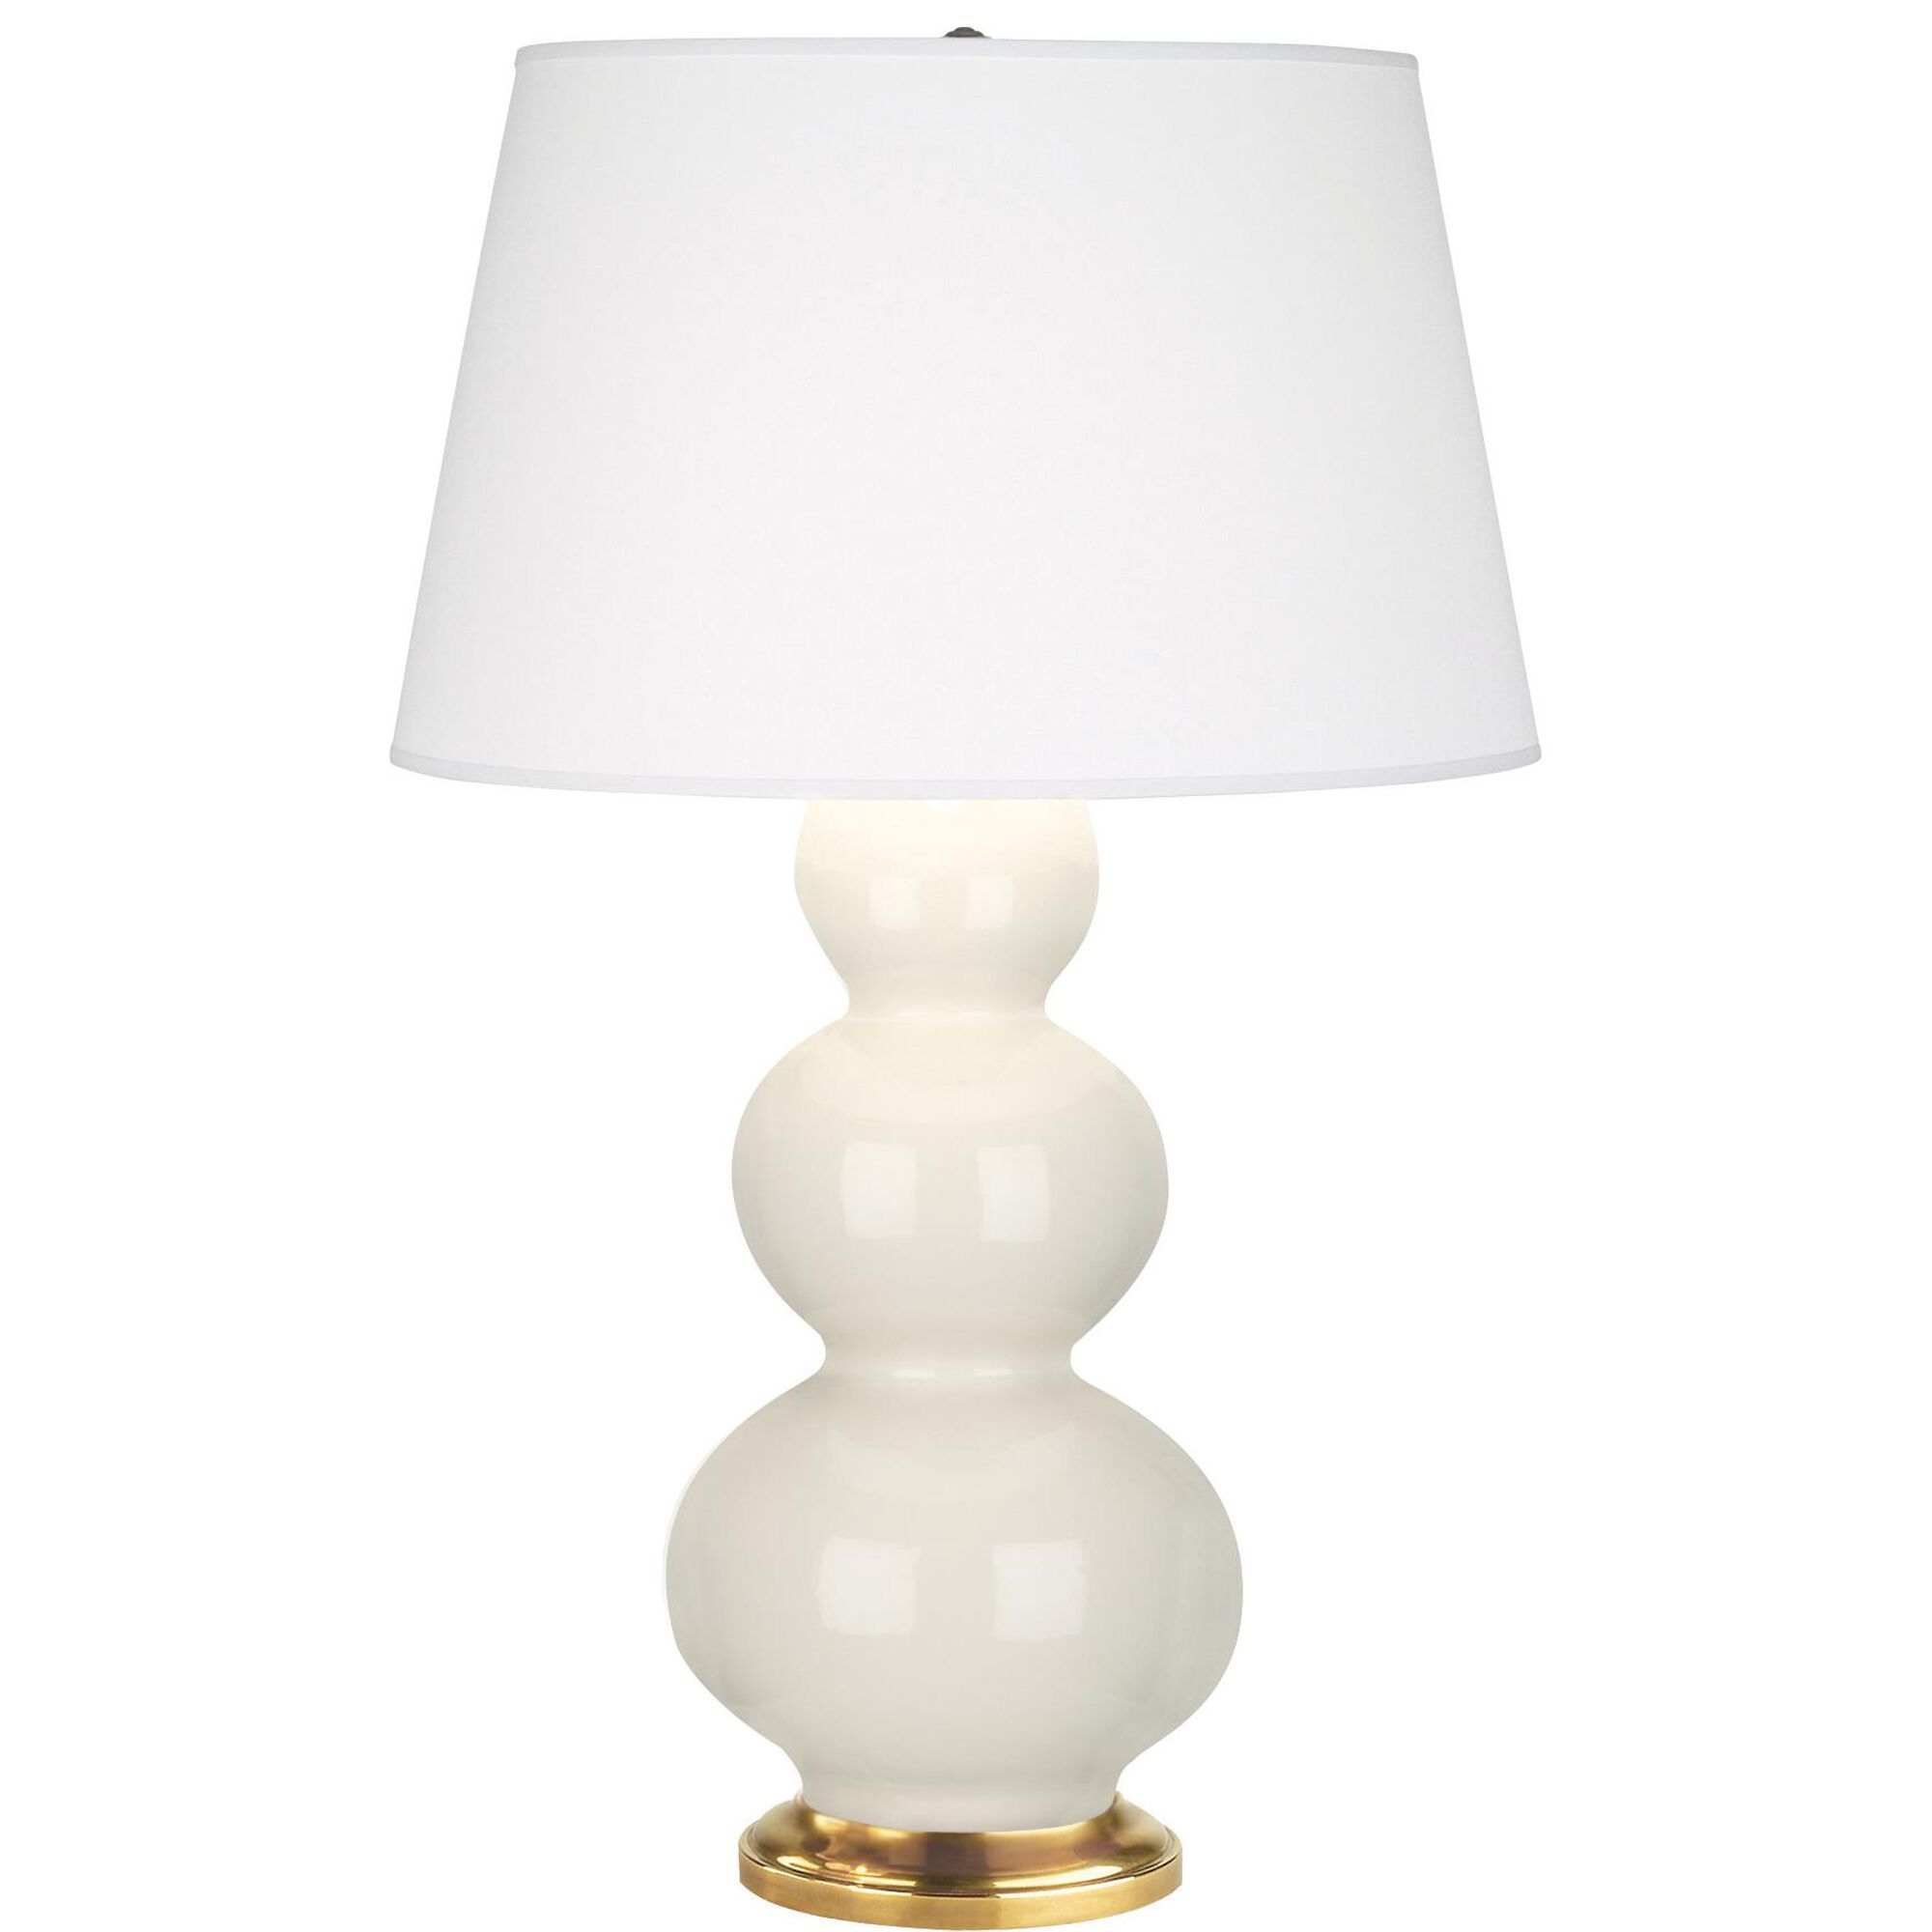 Triple Gourd 32 Inch Table Lamp by Robert Abbey | Capitol Lighting 1800lighting.com